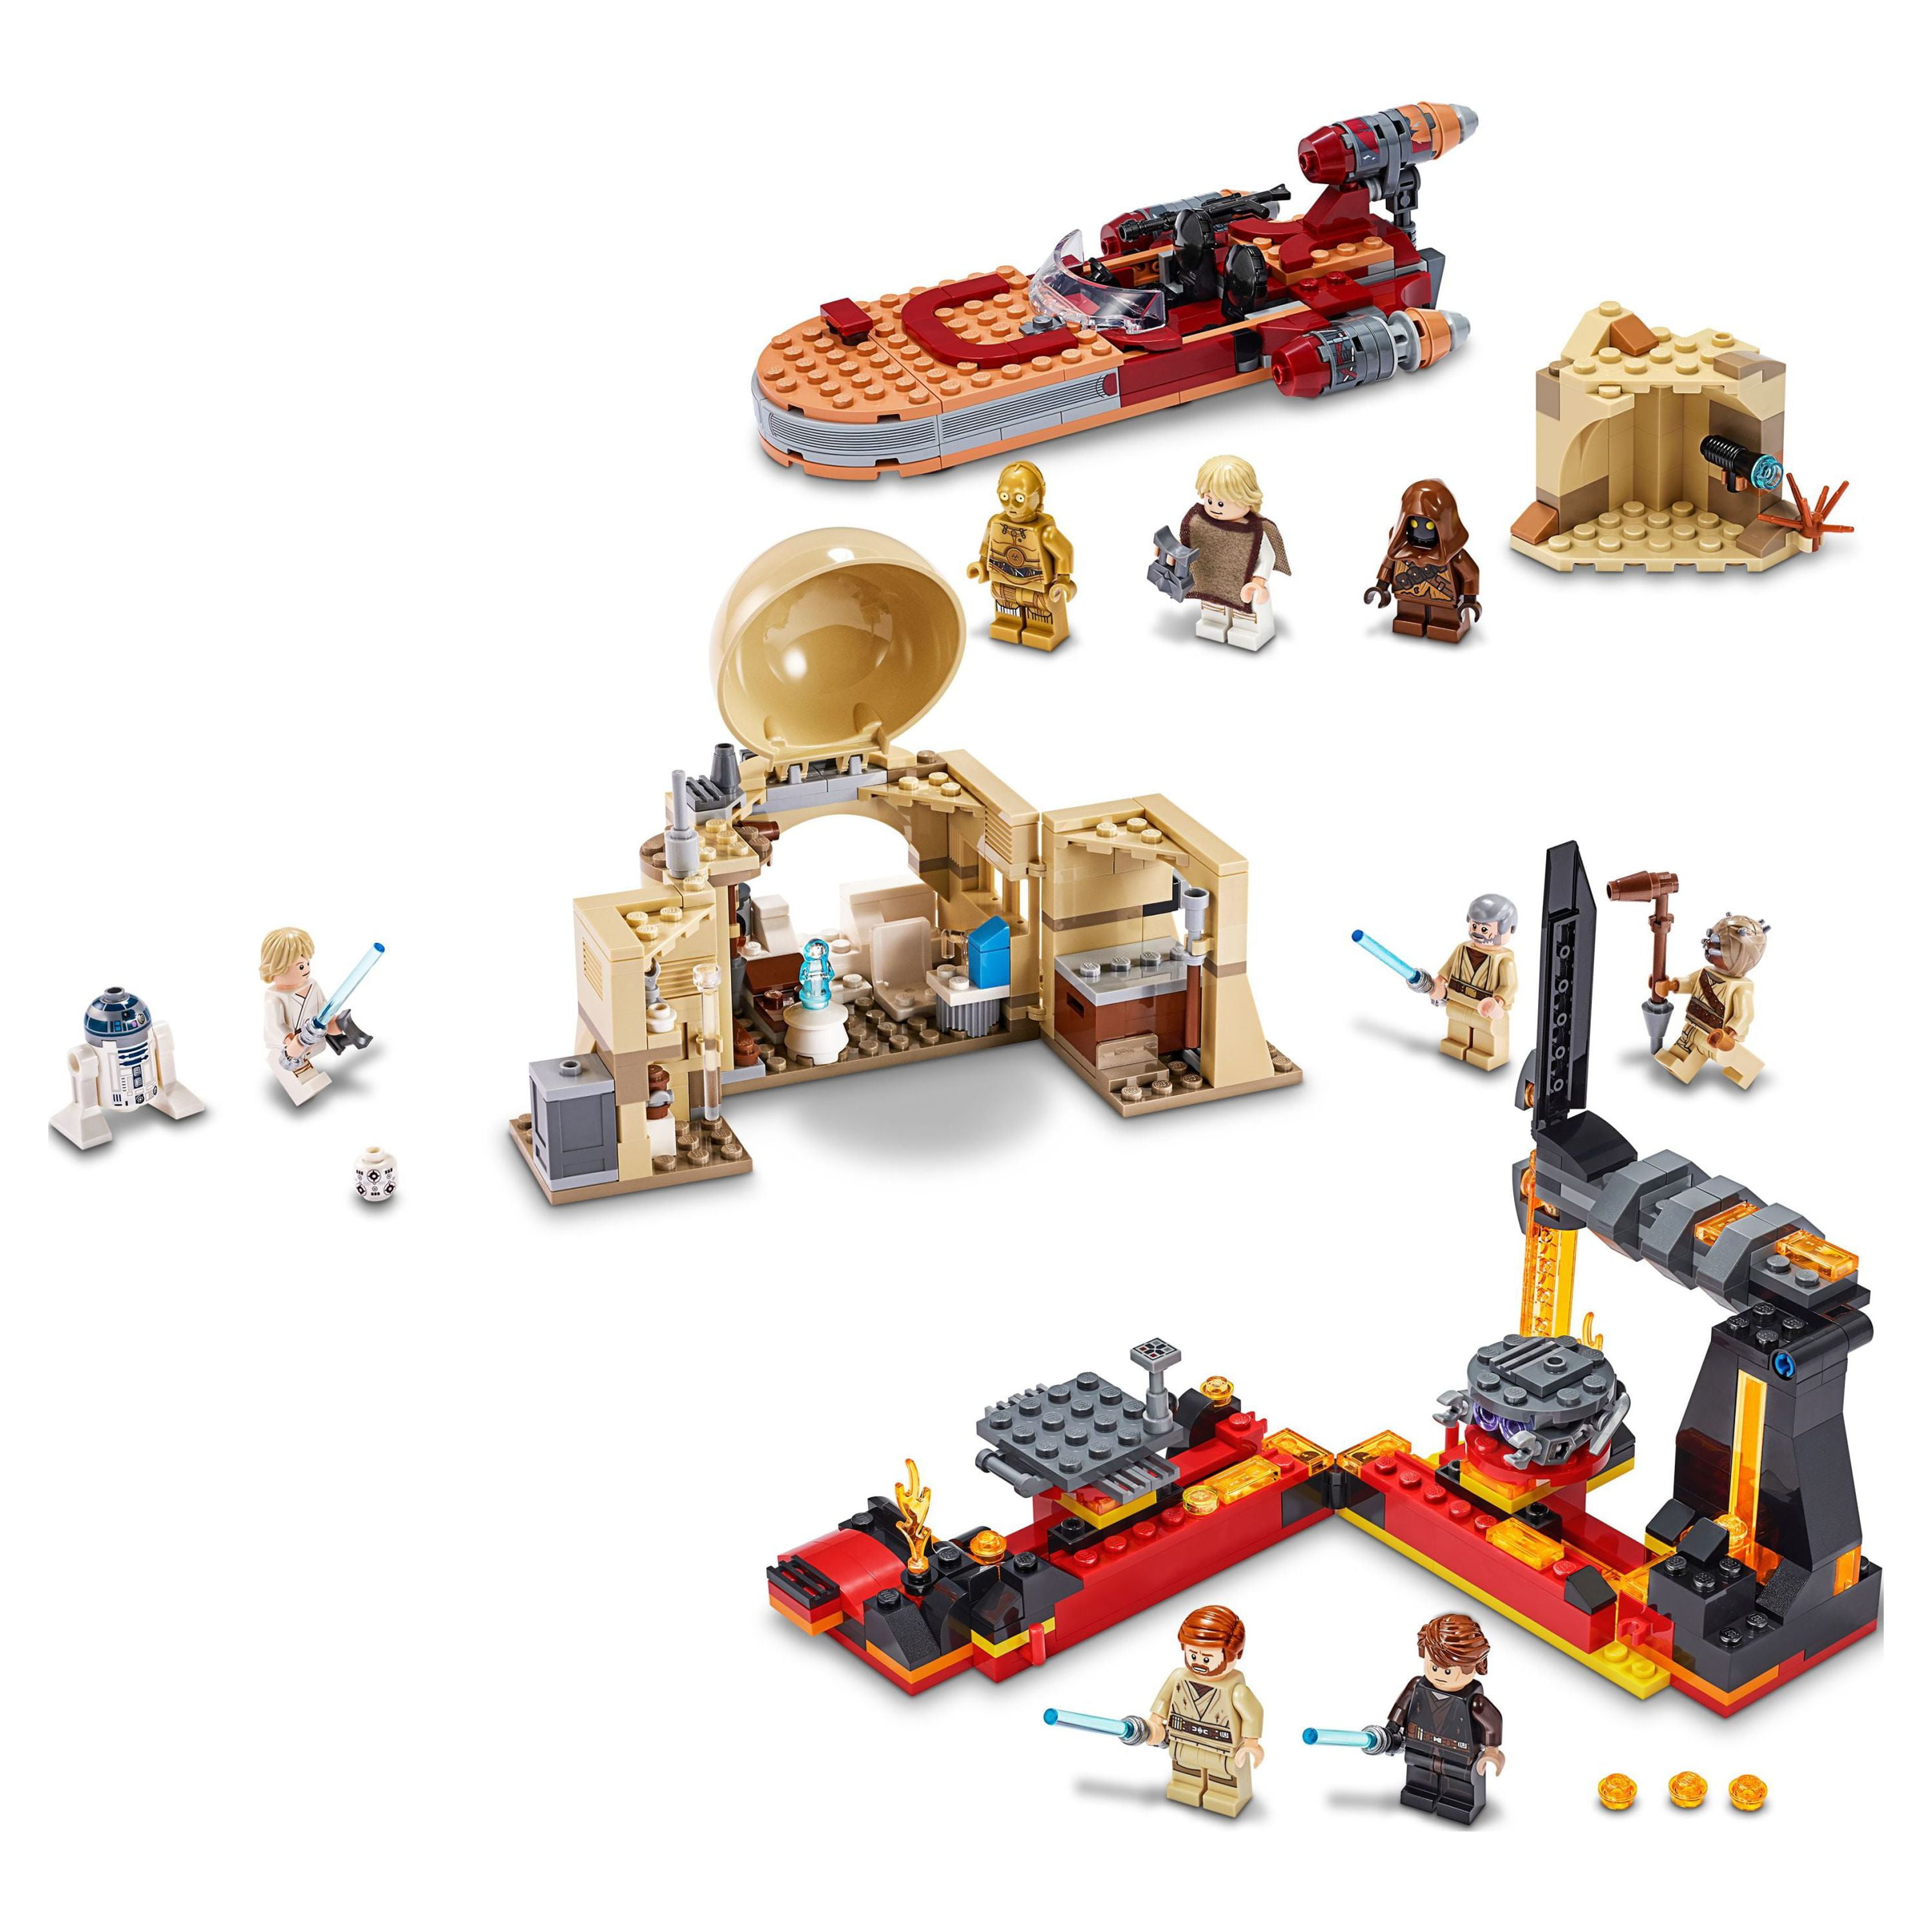 Buy LEGO Star Wars: The Skywalker Saga from the Humble Store